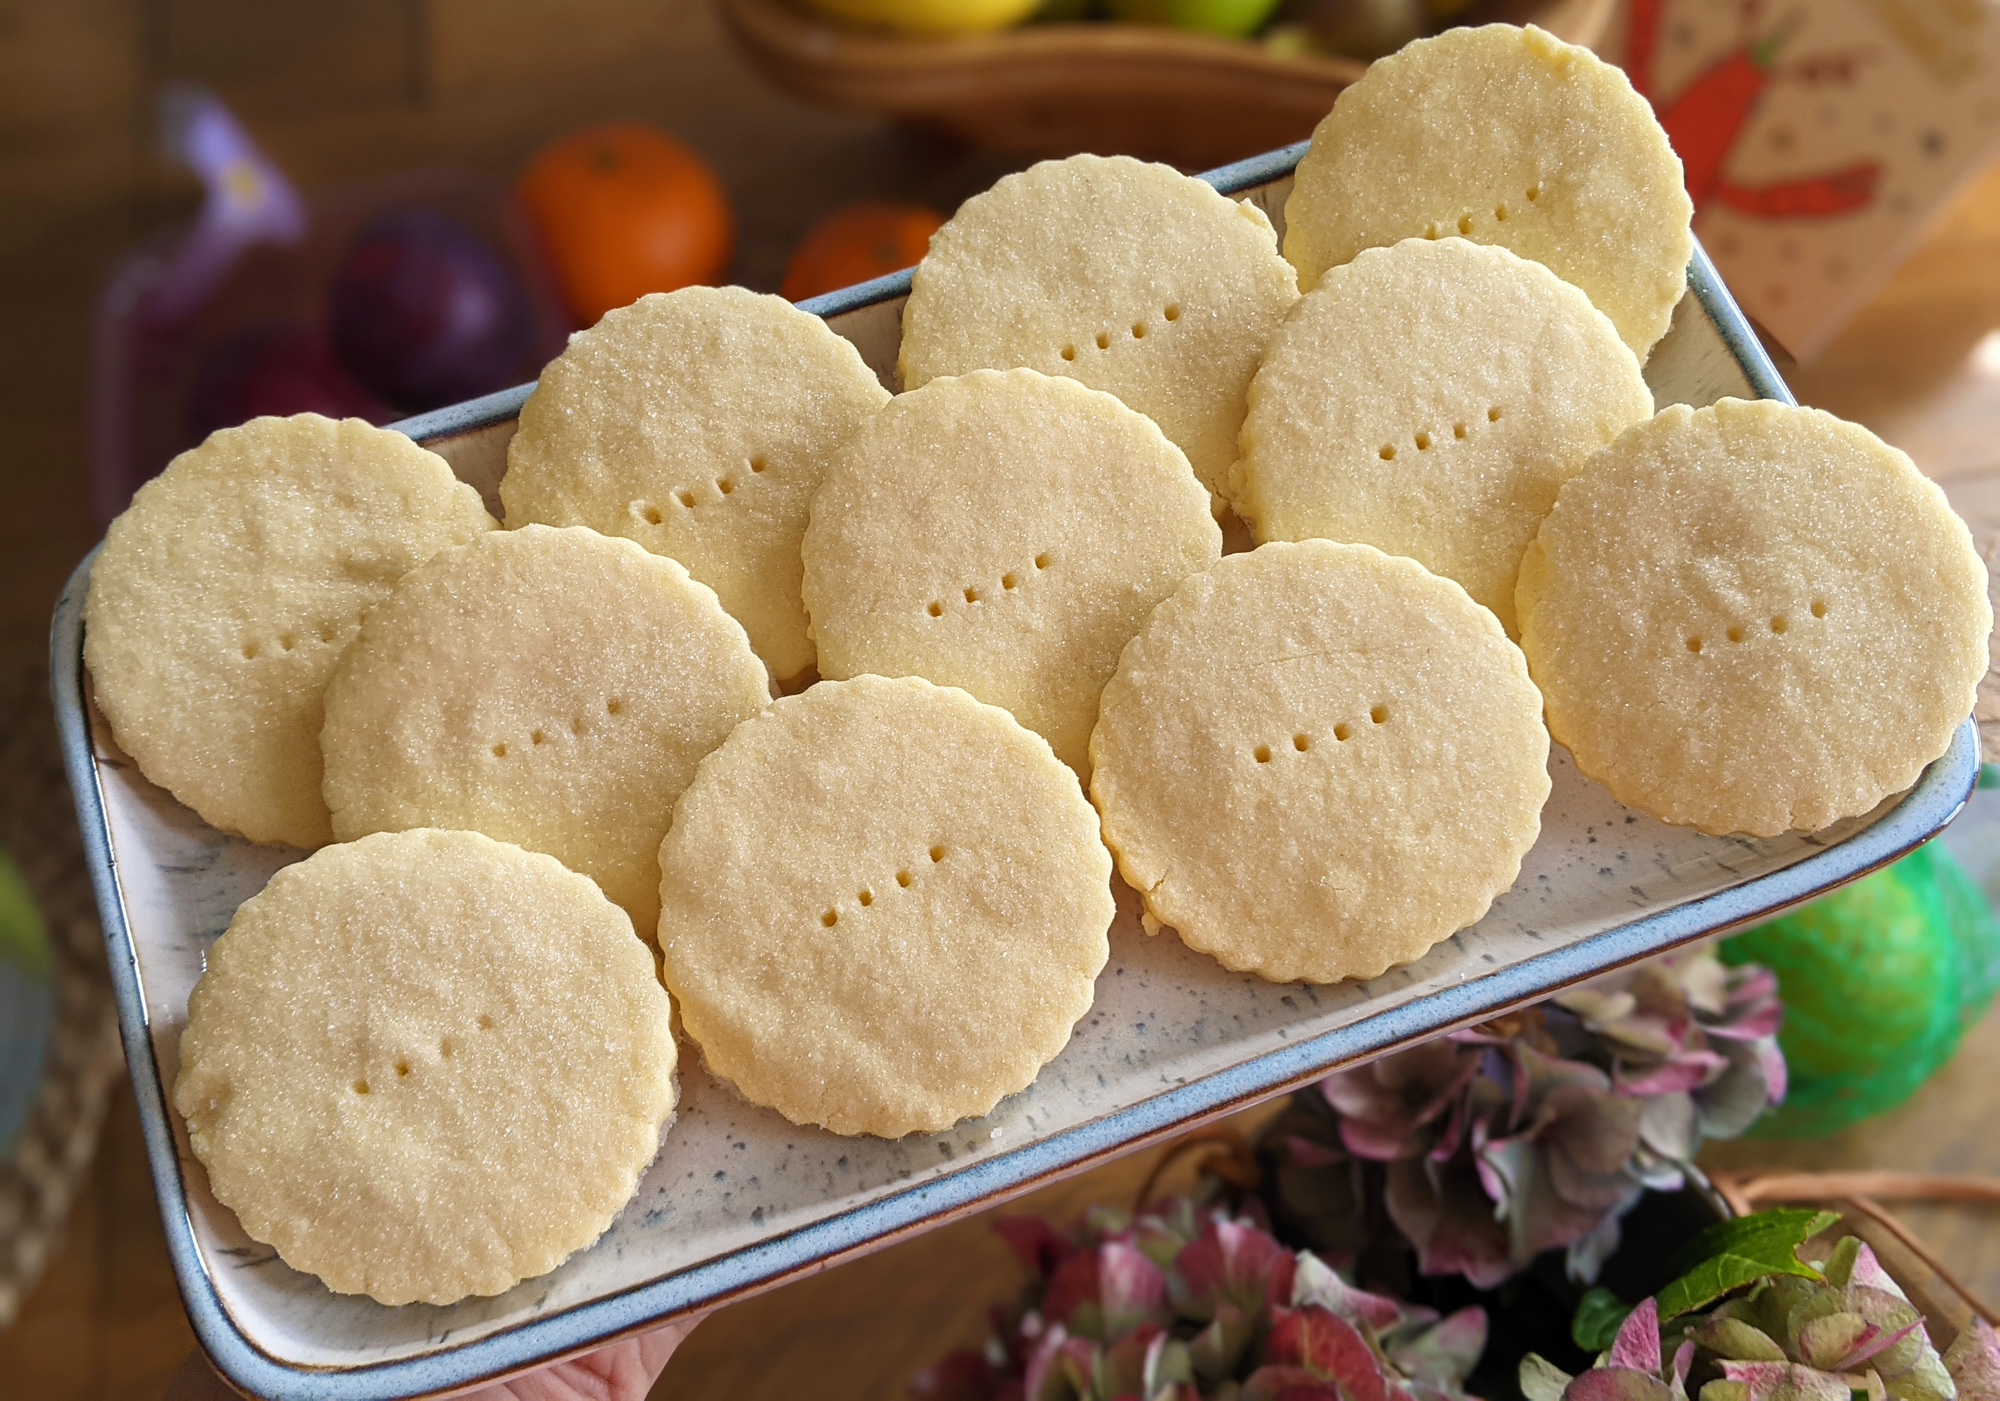 Bake these buttery, crisp, Gluten Free Shortbread Cookies in one of those  fancy British shortbread pans. Sprinkle the top with some…